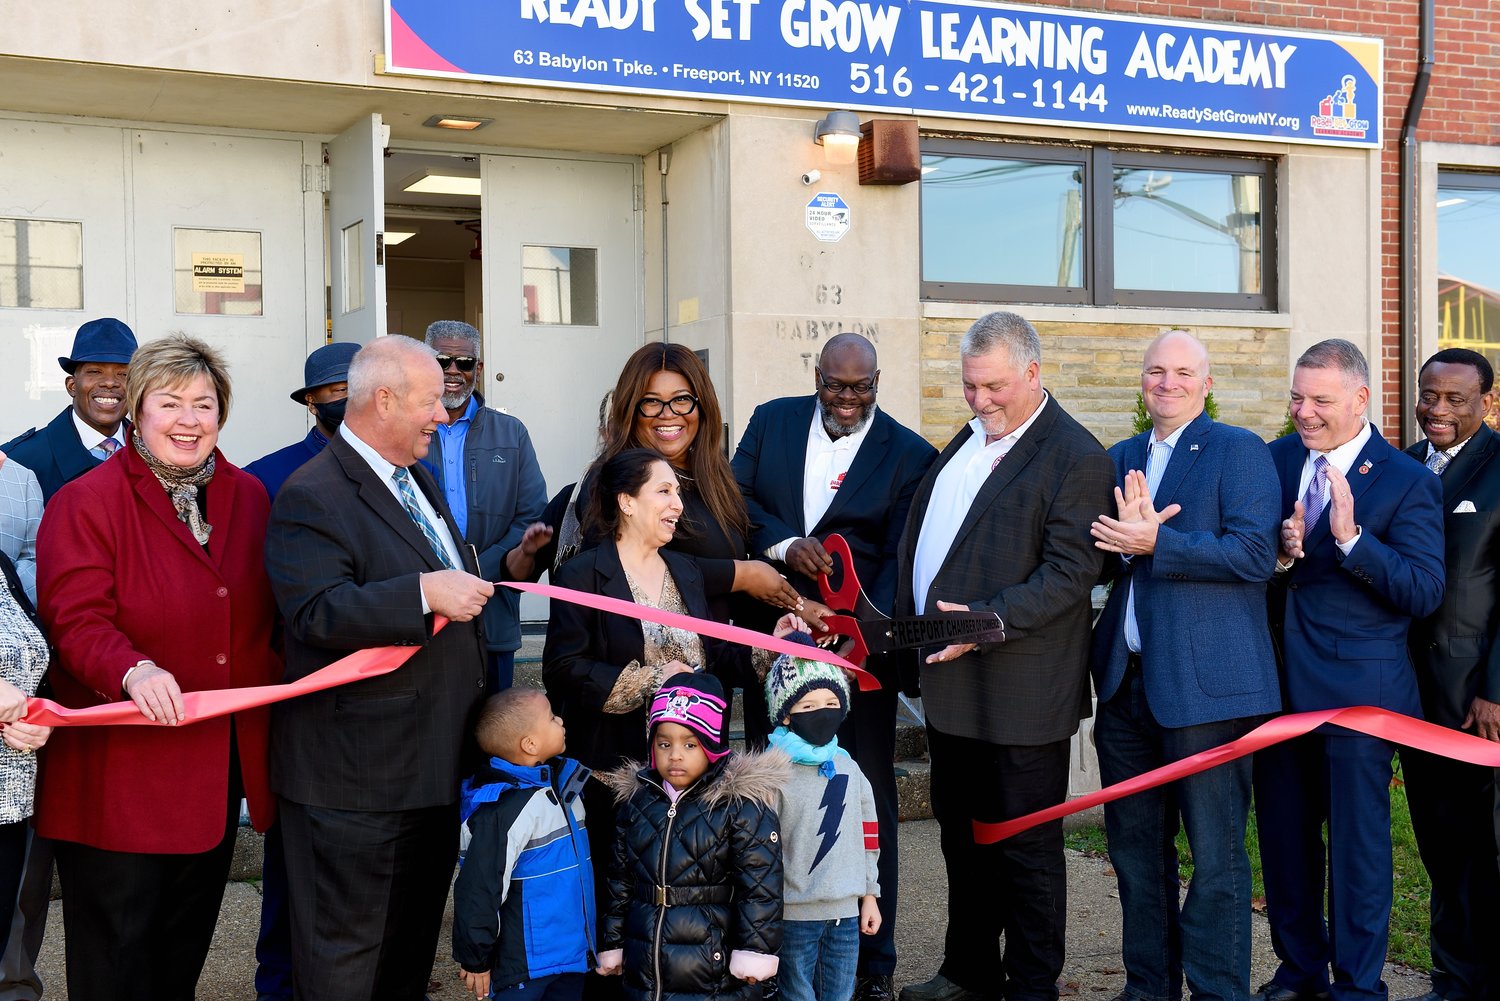 Local officials and church dignitaries attended the grand opening of Ready Set Grow Learning Academy in the Freeport Armory. From left were Bishop Frank Anthone White, of Zion Cathedral in Freeport (behind Hempstead Town Clerk Kate Murray); the Rev. Robert Adams (partially hidden); Freeport Mayor Robert Kennedy; the Rev. Willie J. McGhee (in sunglasses); RSGLA Director Naheed Khan; the academy’s co-owners, Chelisa and Daryl Harris; Chamber of Commerce President Ben Jackson; Hempstead Town Councilman Chris Carini; County Legislator Steve Rhoads, and Bishop Robert Joel Rochford of New Life Cathedral, in Brooklyn, with youngsters from the academy.